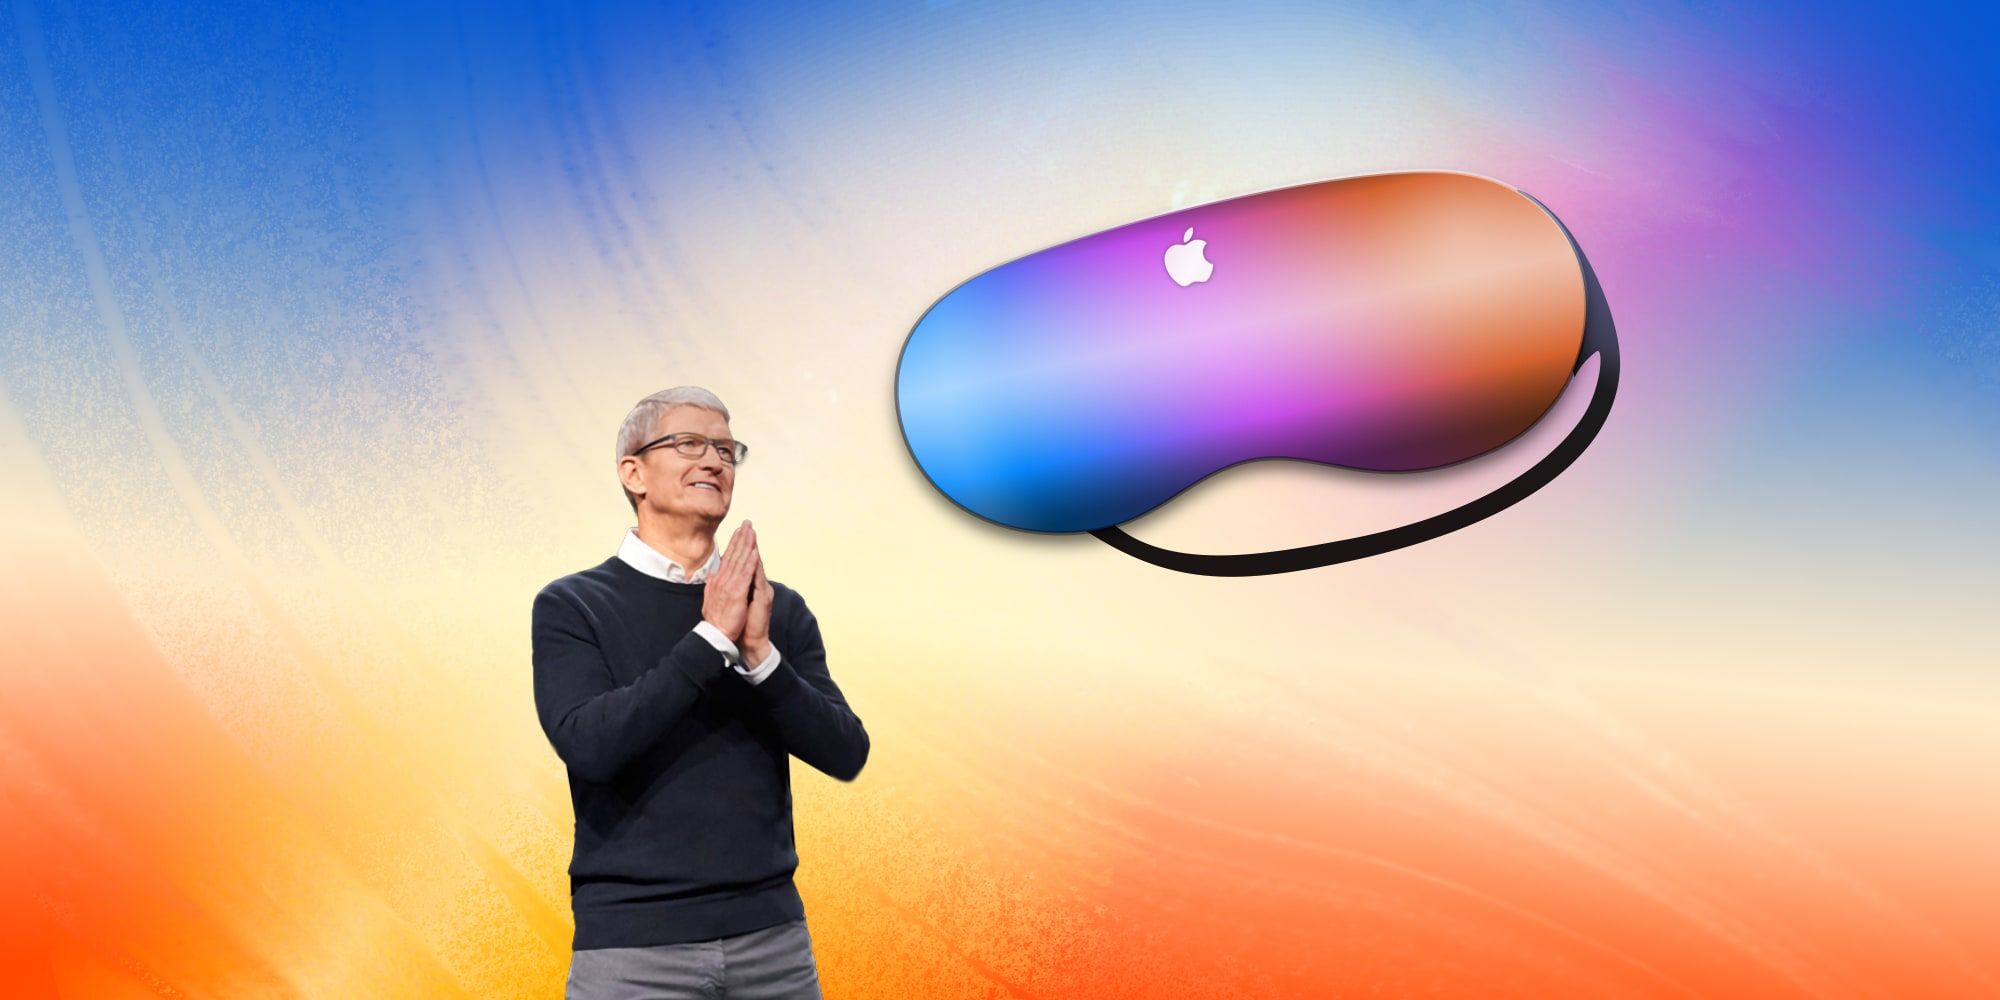 Apple’s AR Headset Could Be Available By June Next Year